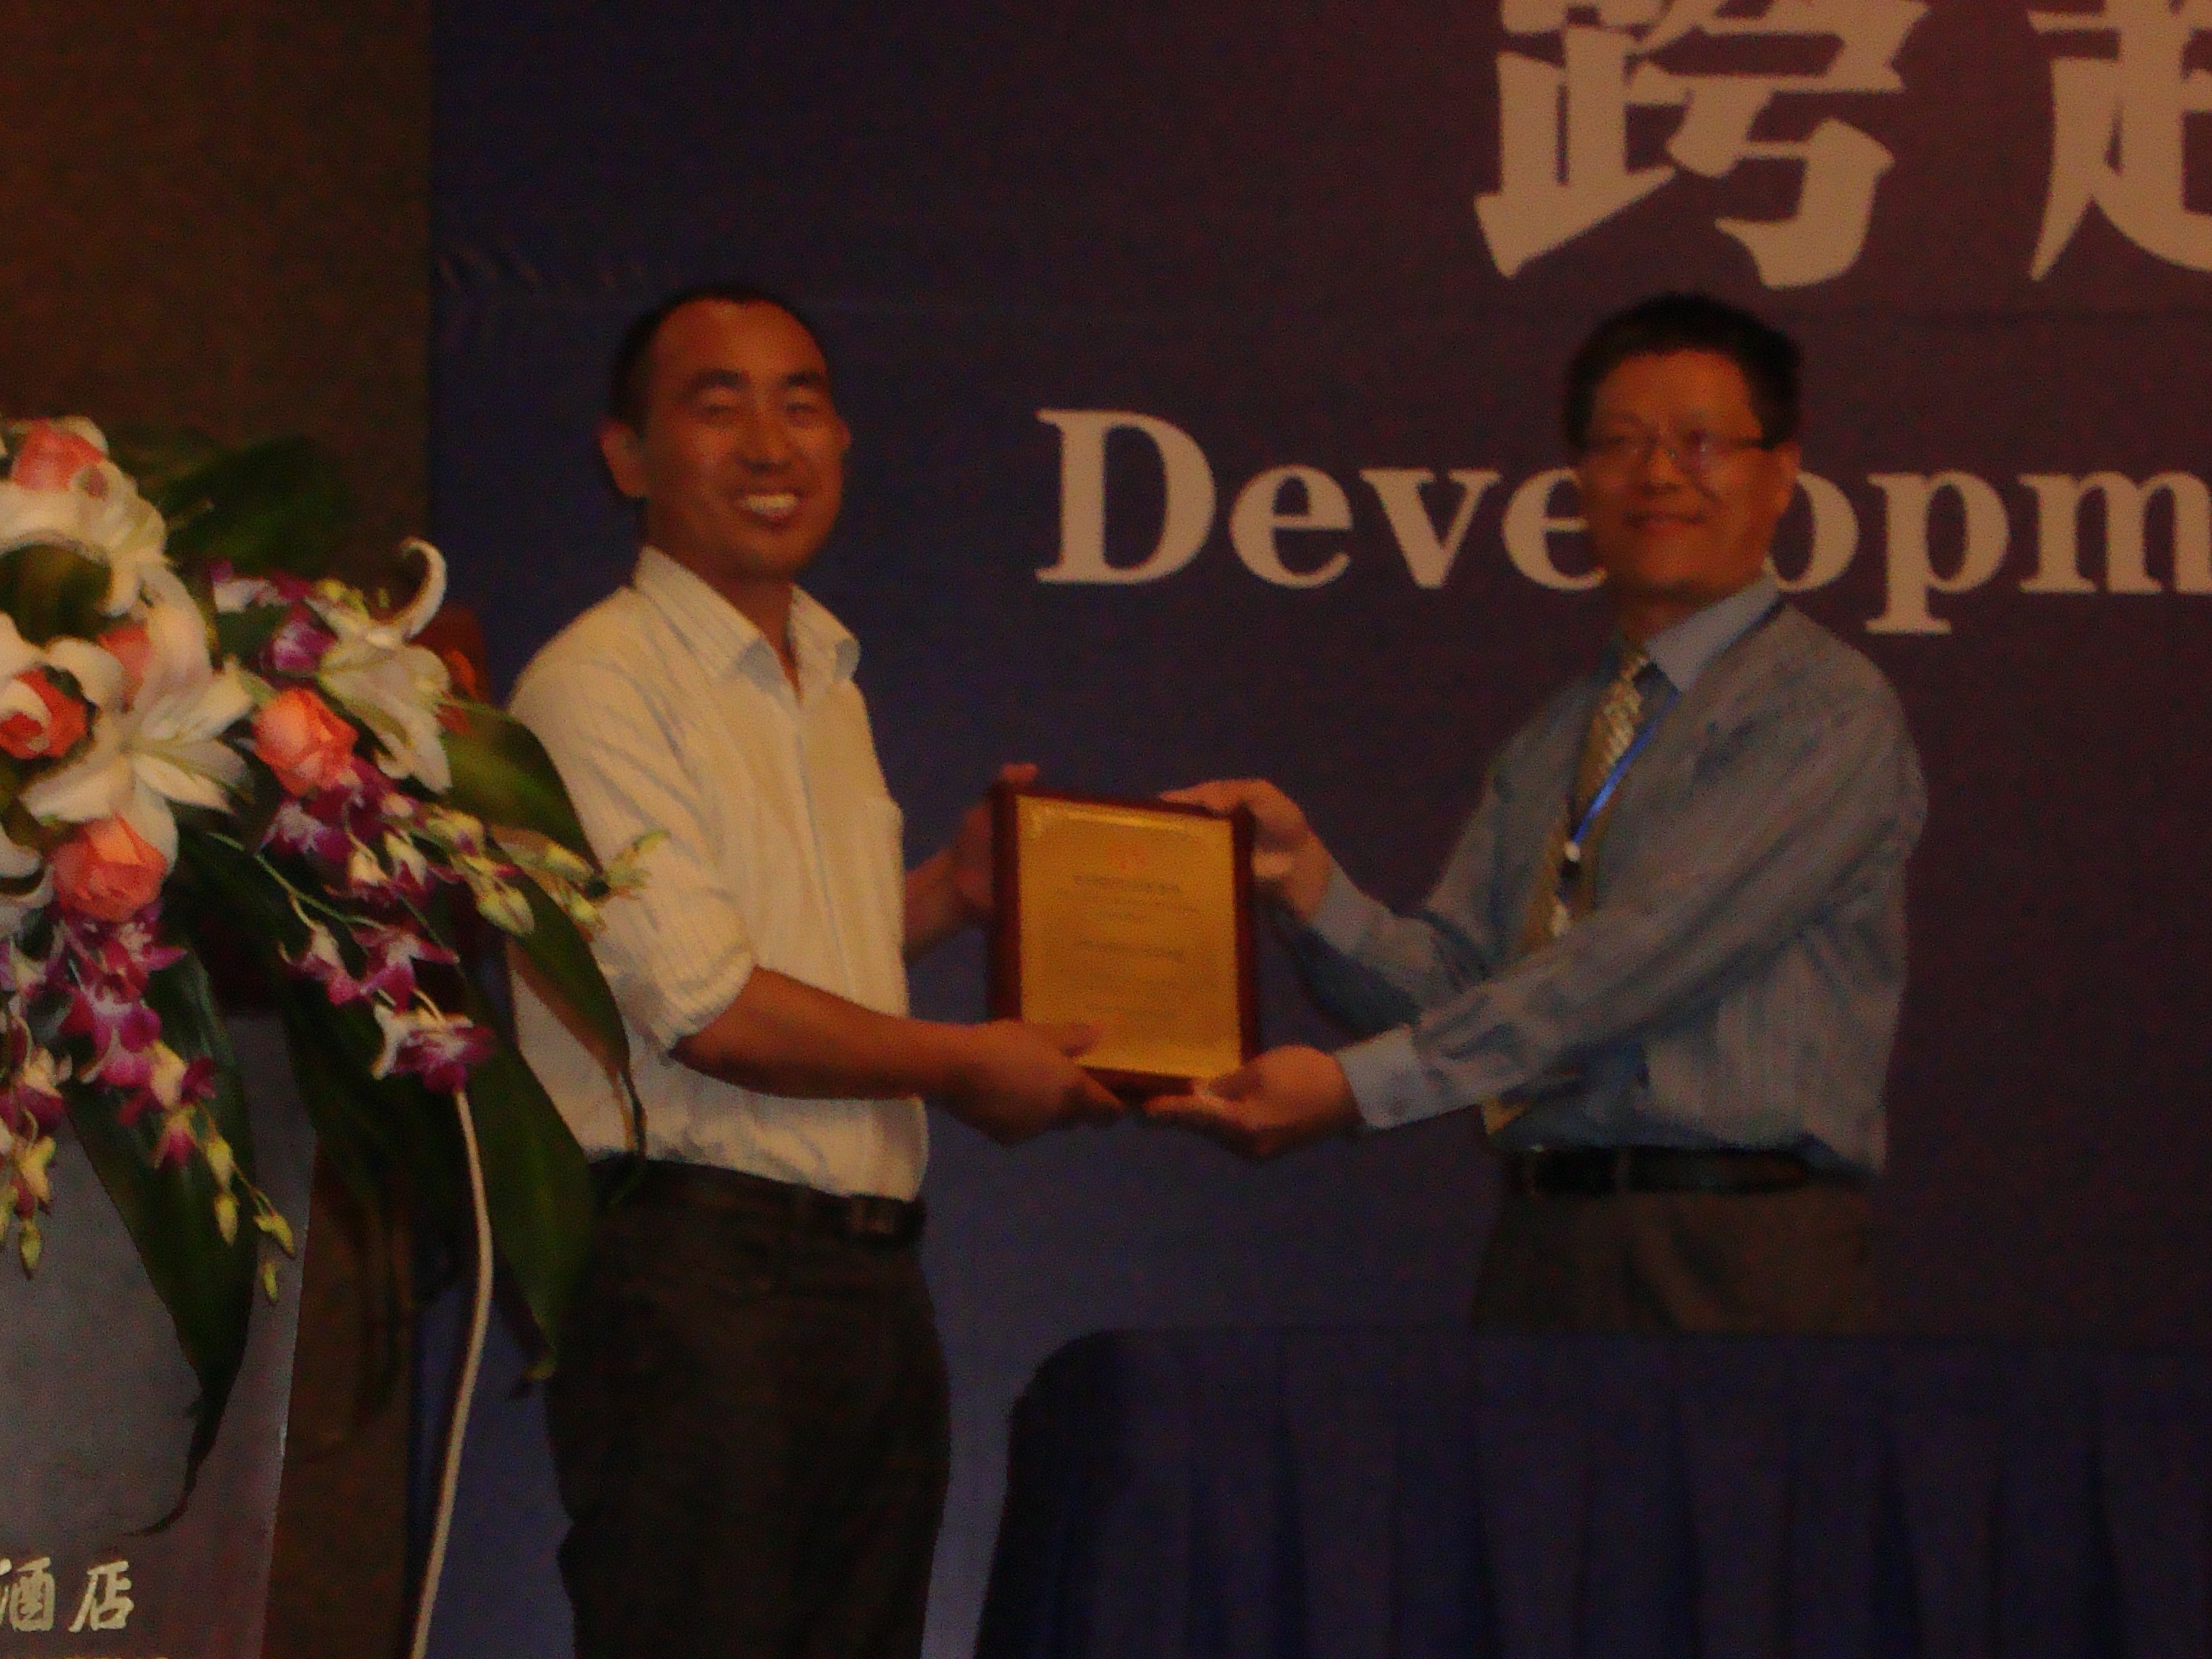 CES President Ding Lu and Vice President Bingtao Song